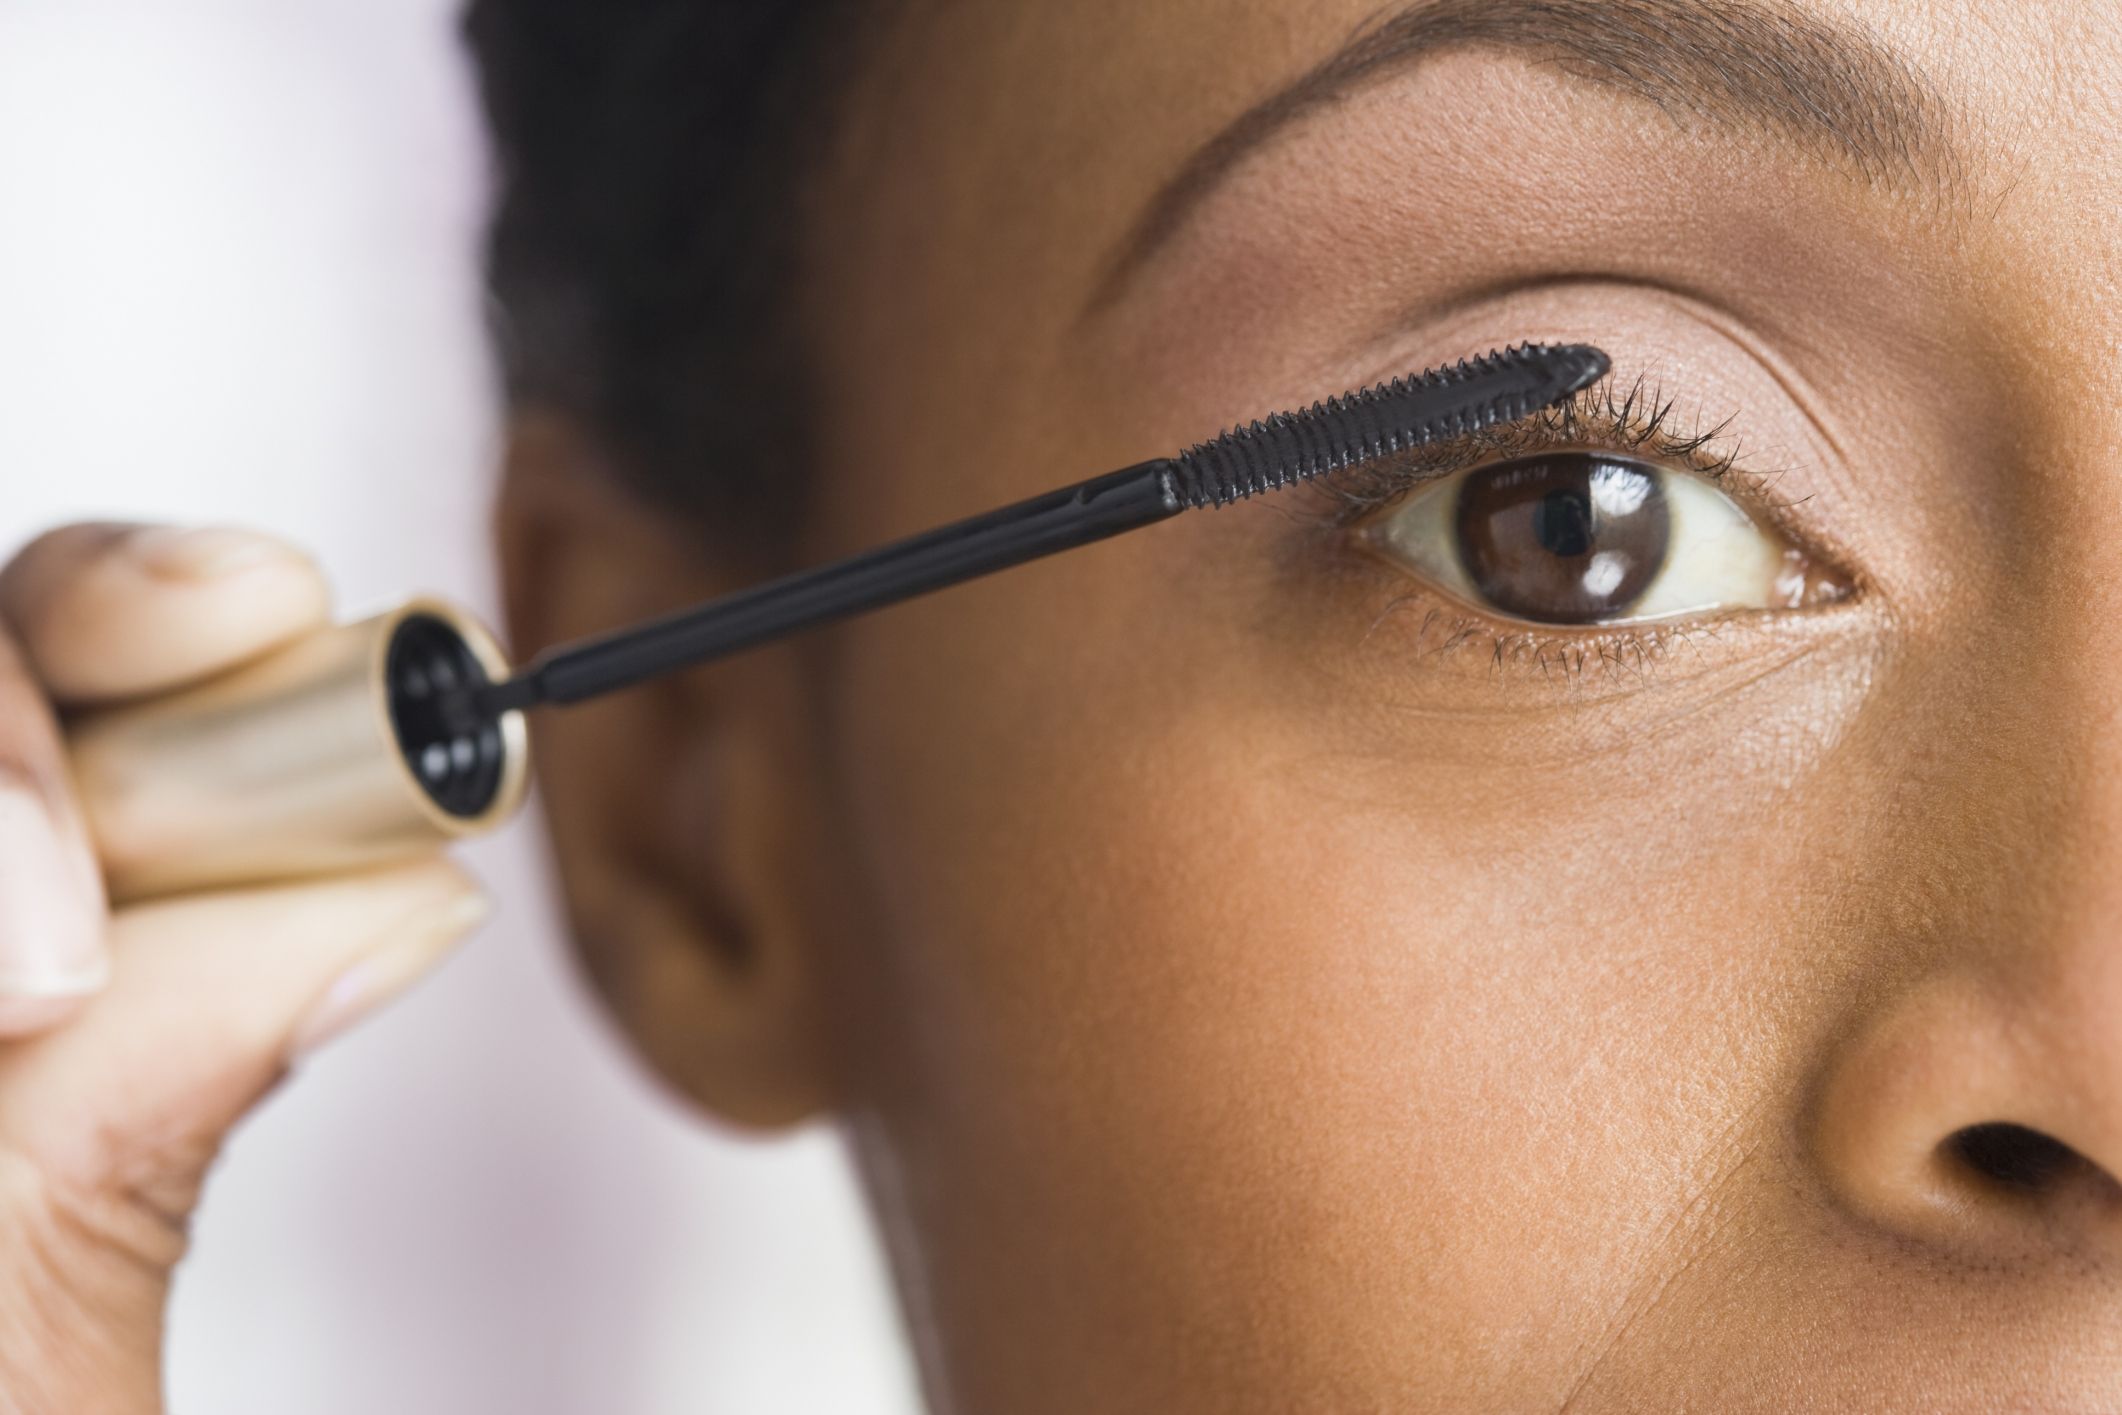 Efternavn Bygger Bibliografi Mistakes You're Making with Your Mascara - Mascara Mistakes